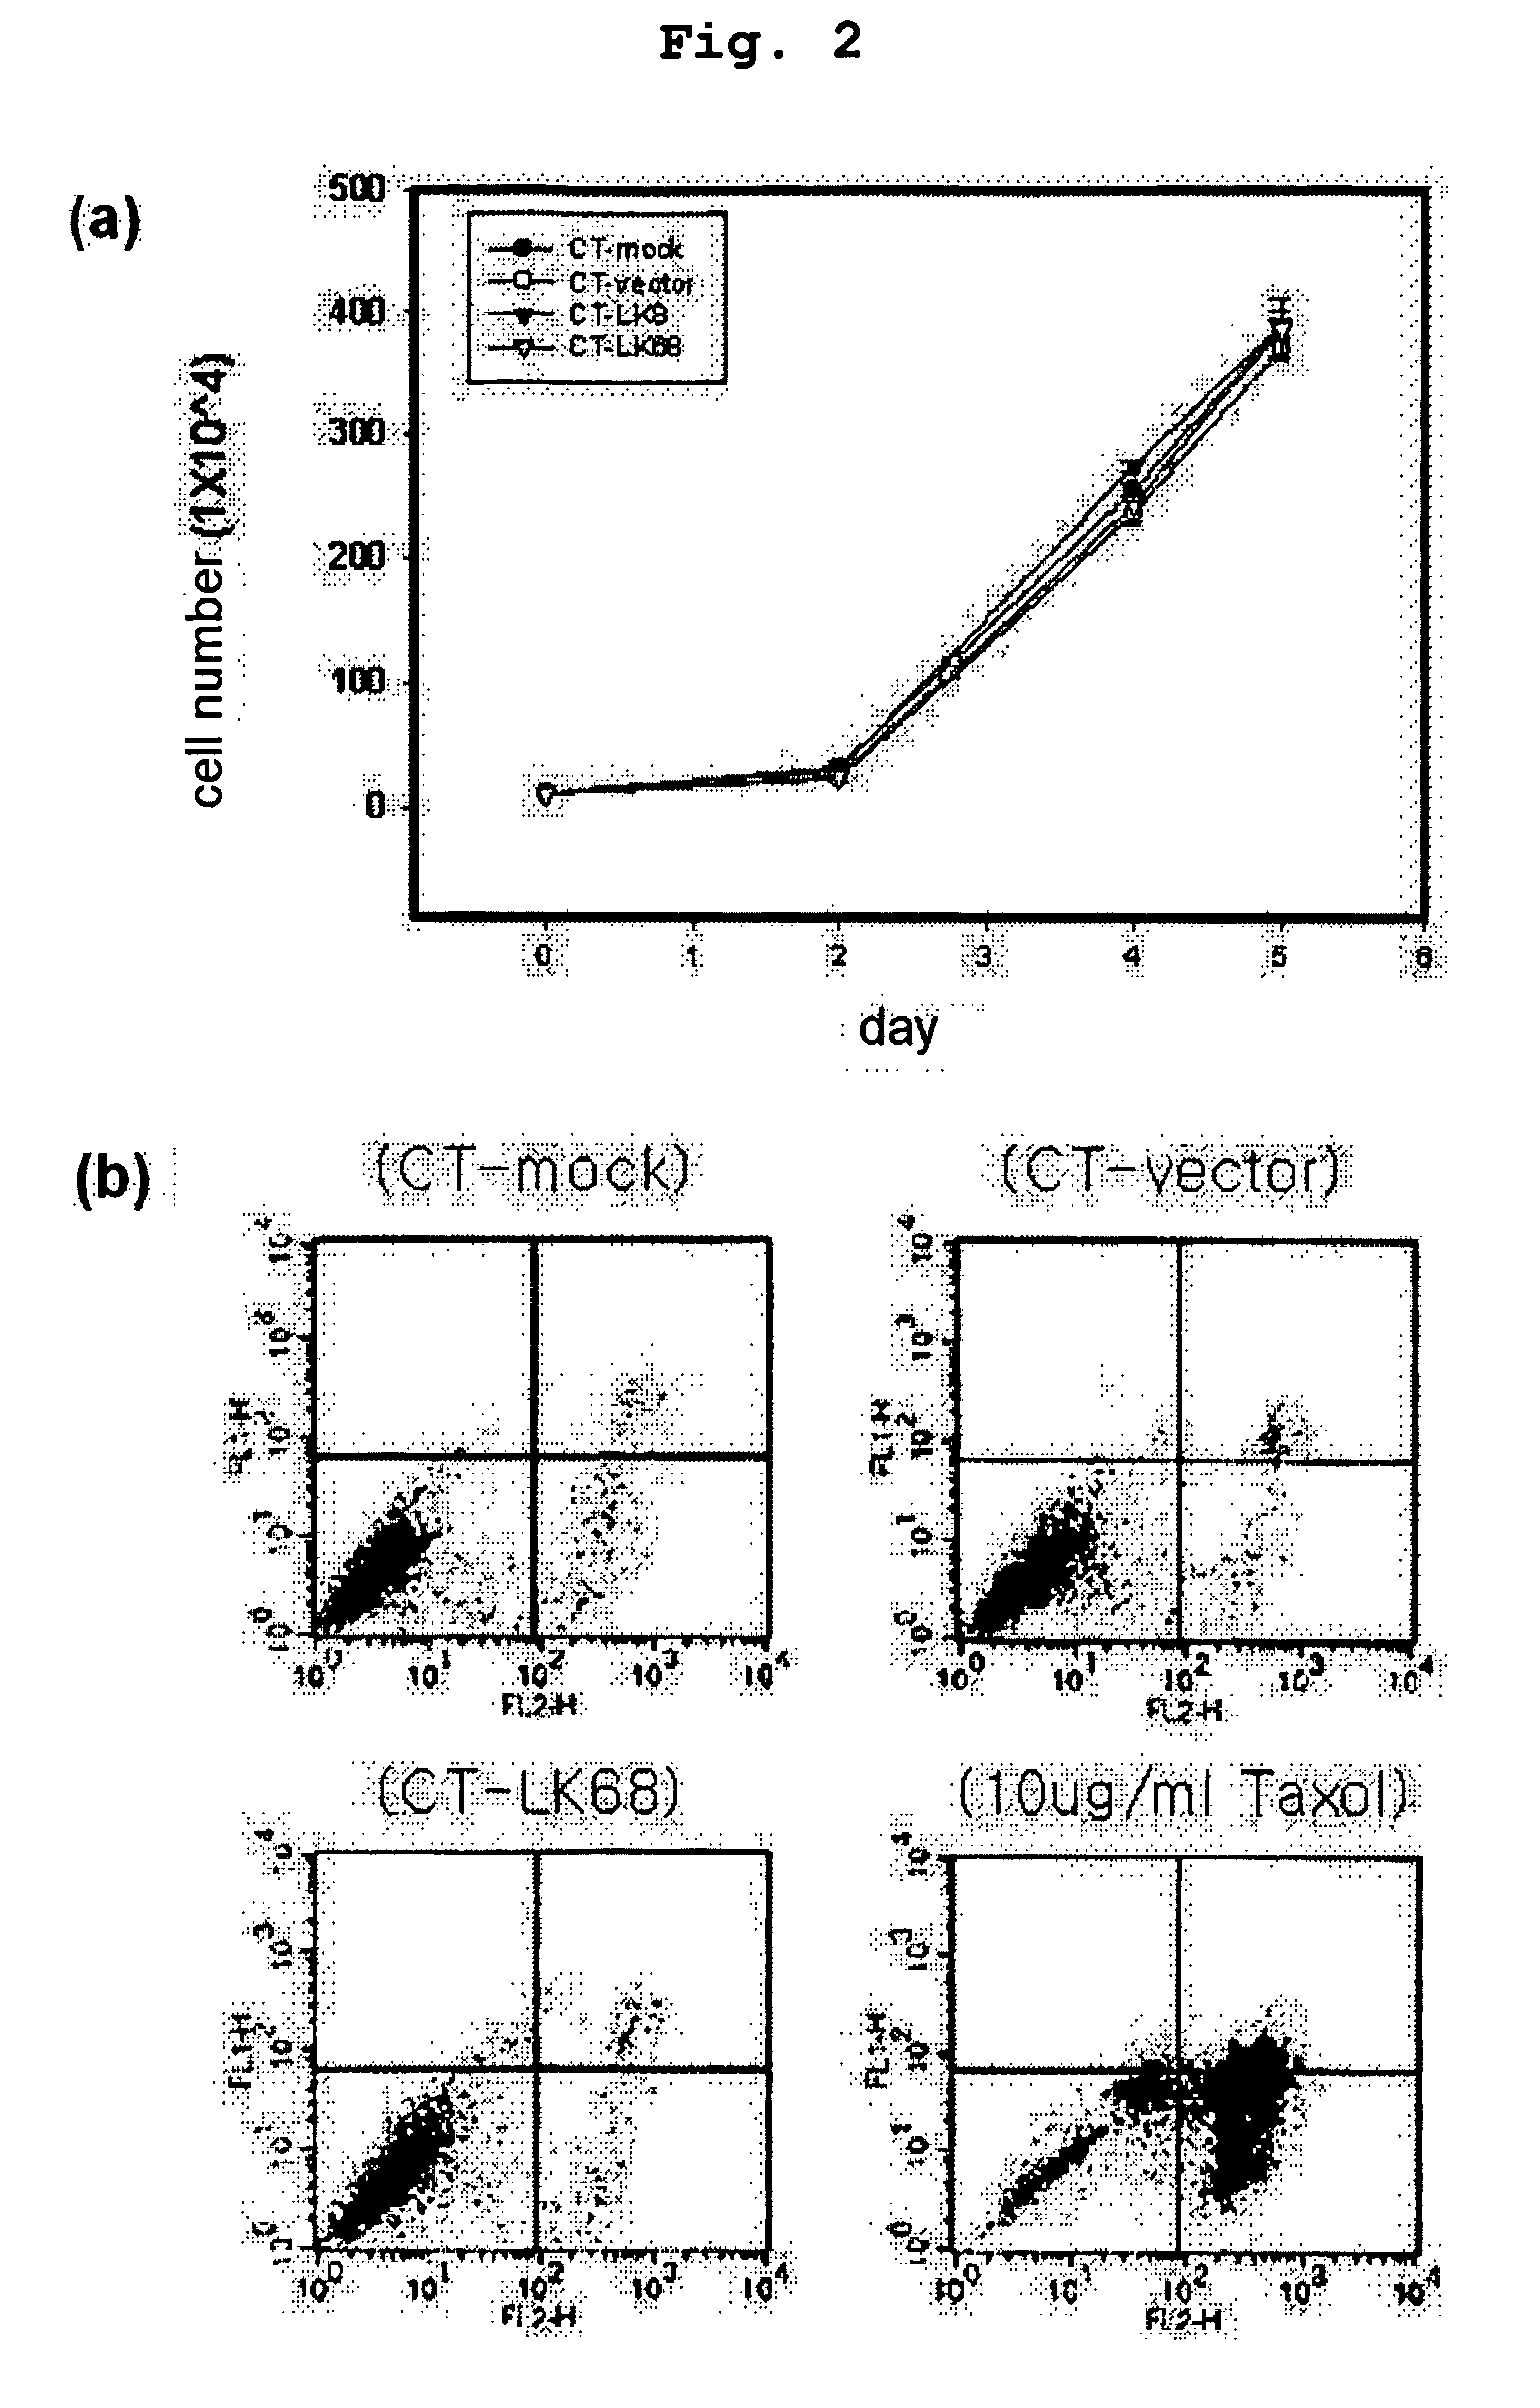 Therapeutic agent for treatment of cancer comprising human apolipoprotein (a) kringles lk68 or lk8 genes as effective ingredient, and method for treating cancer using the same